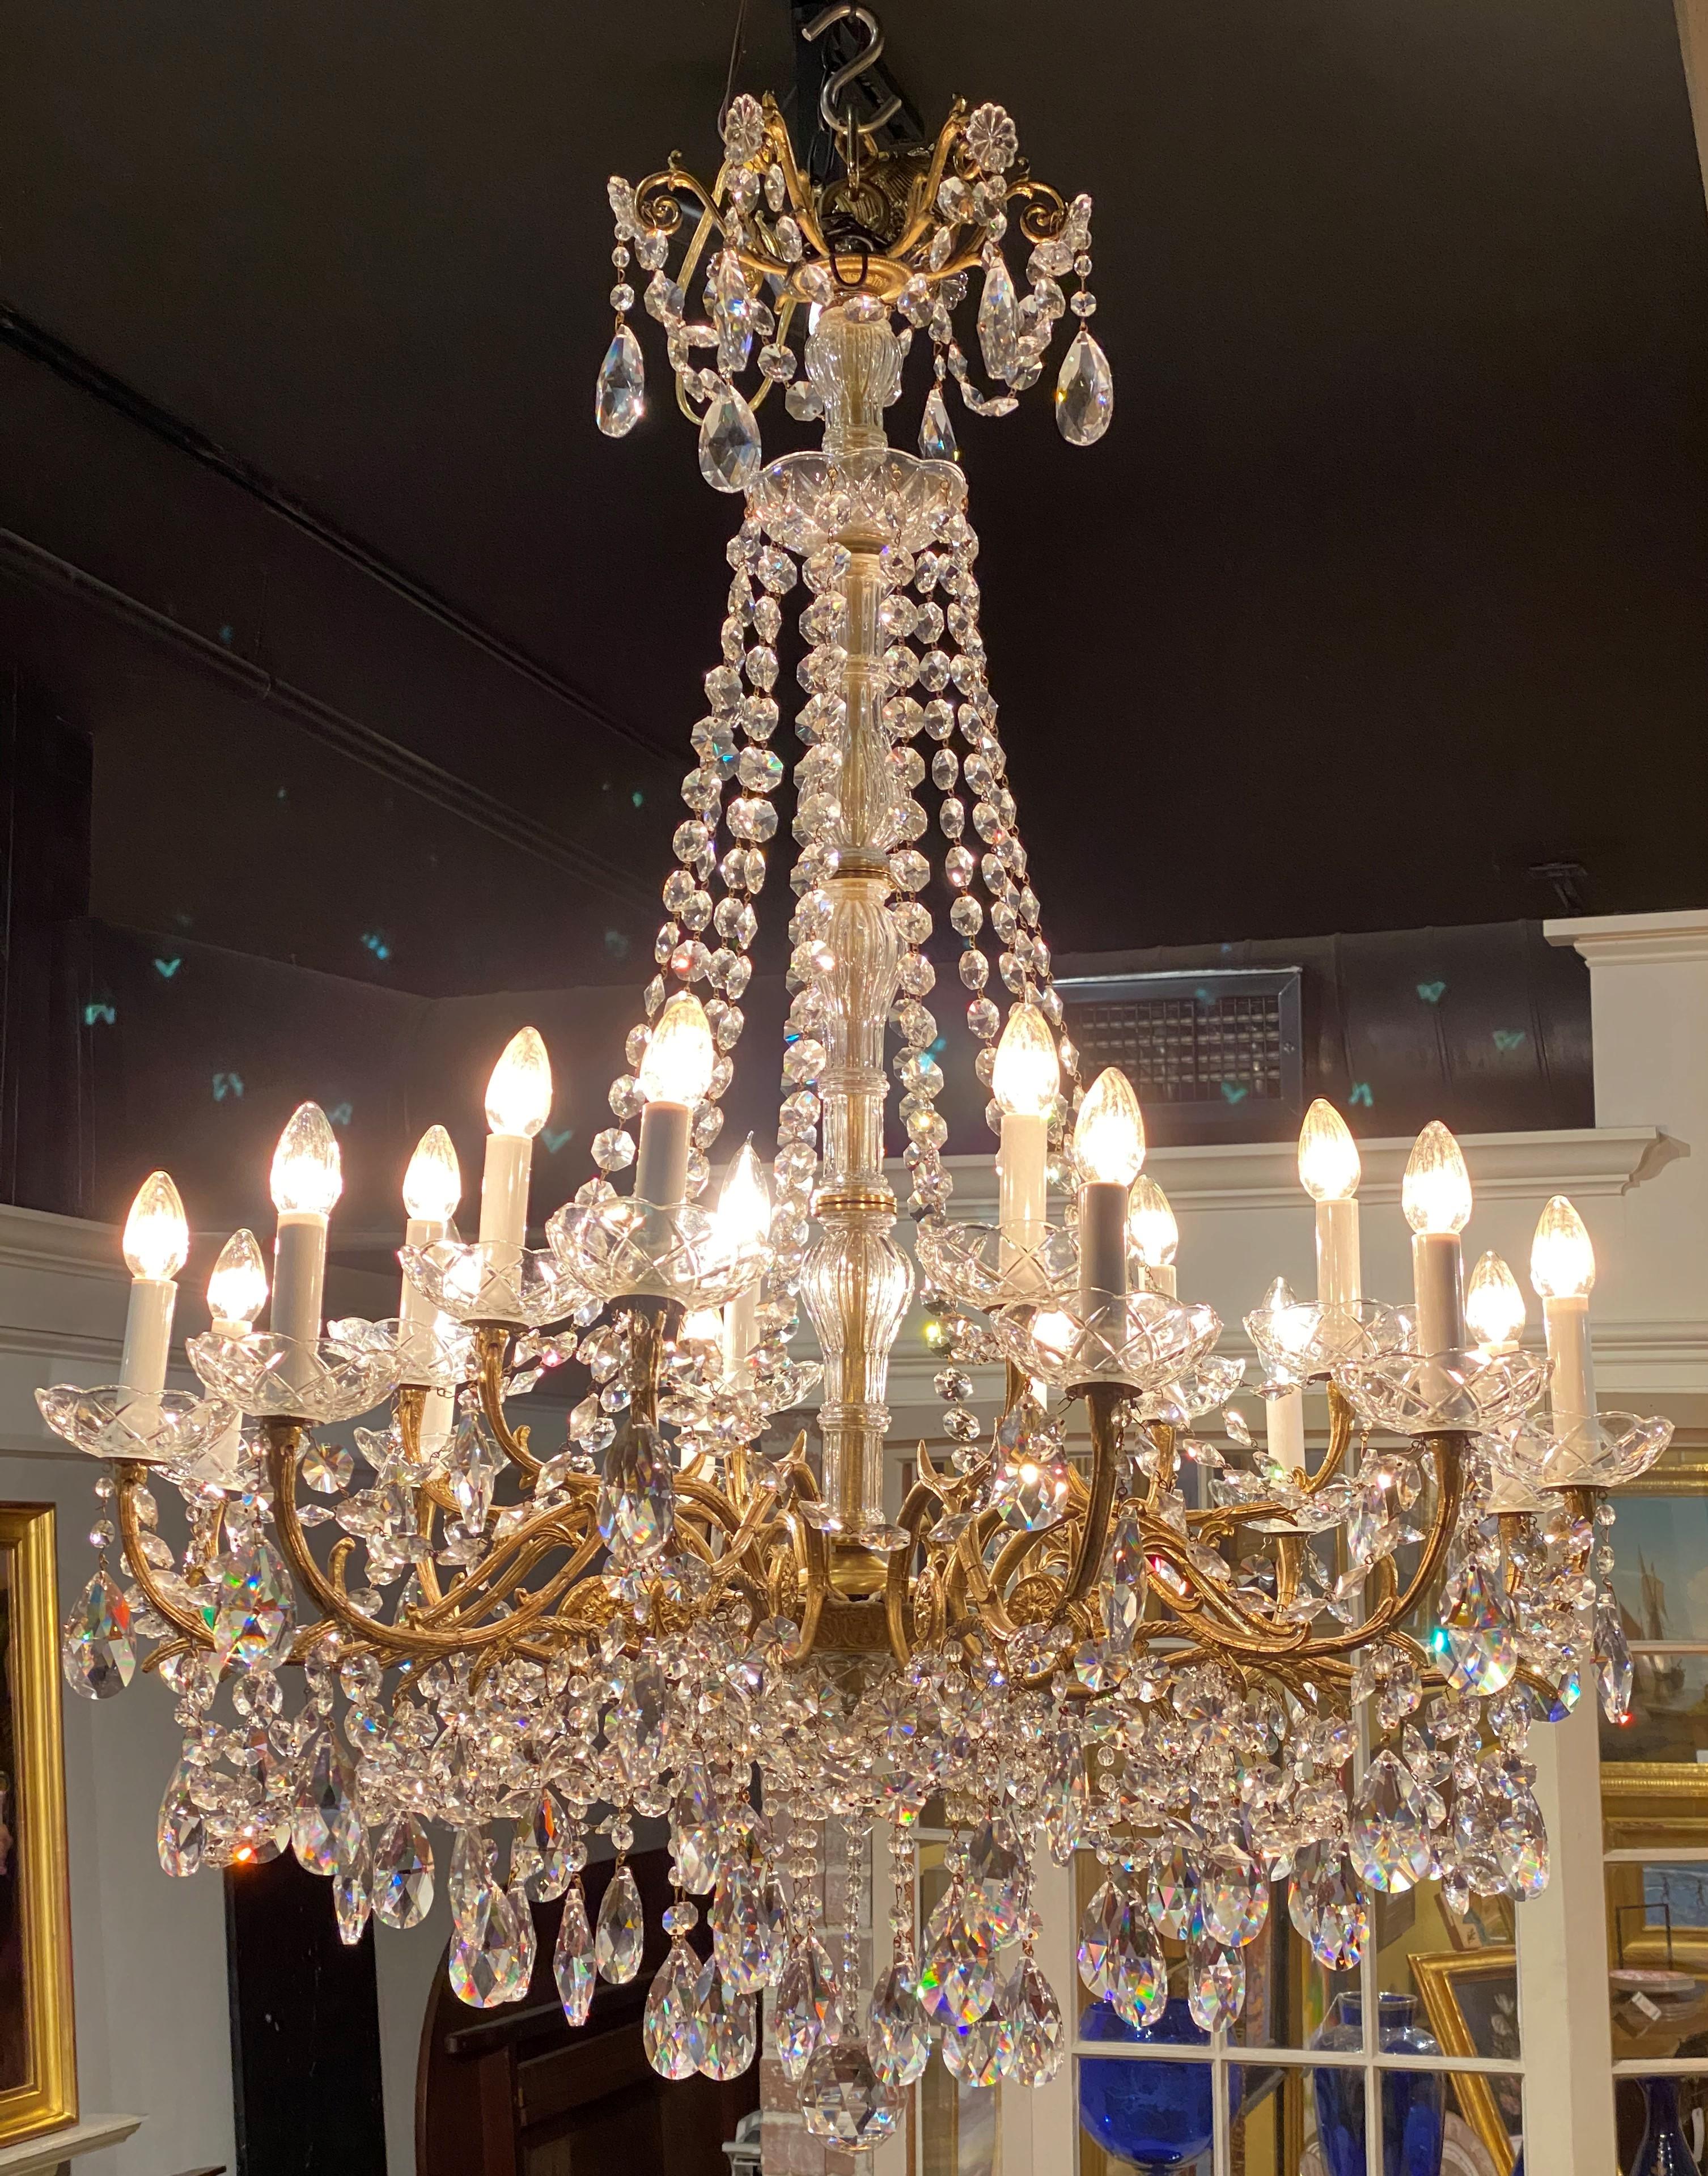 An exquisite French style tiered 18 light chandelier (12 lower, 6 upper) with a crown form crest with floral prisms, surmounting flowing strung prisms around a center crystal column down to brass S scroll arms terminating with candle lights, along